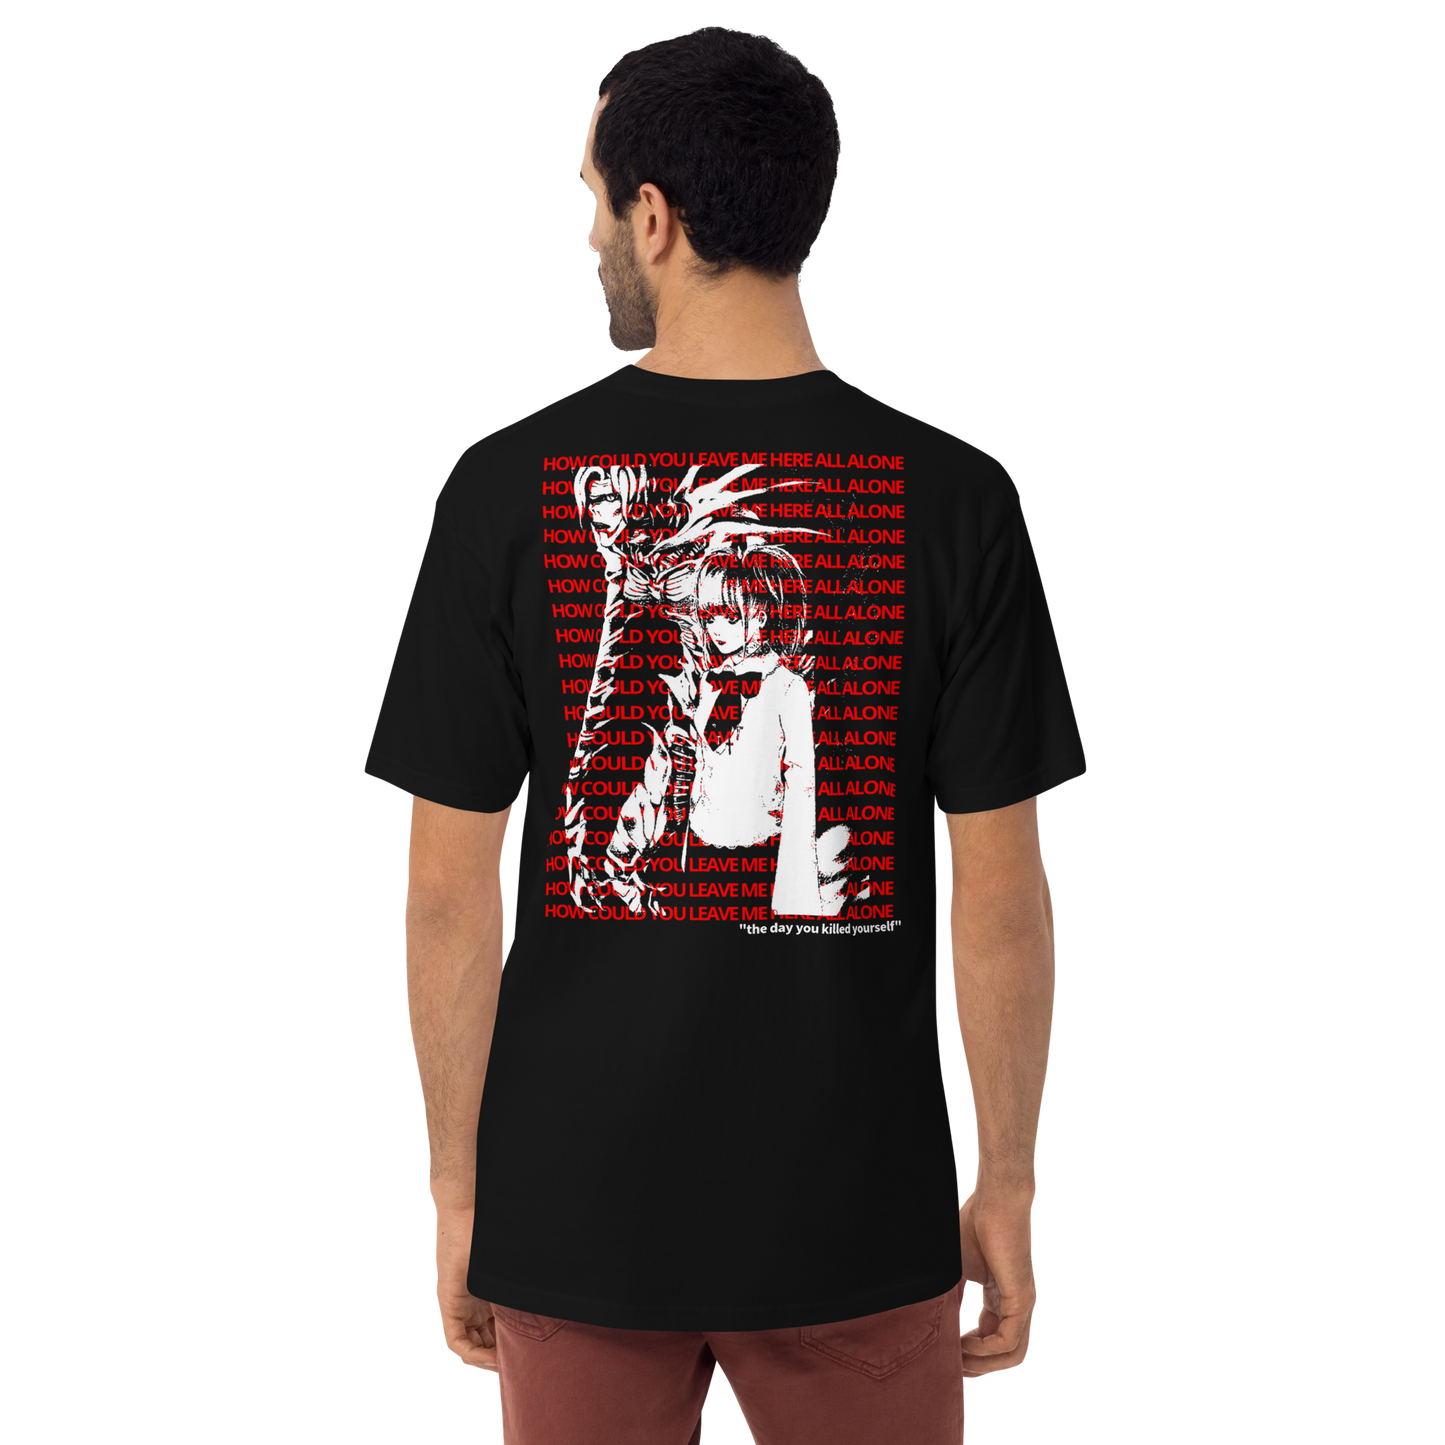 TDYKY X DEATHNOTE SHIRT